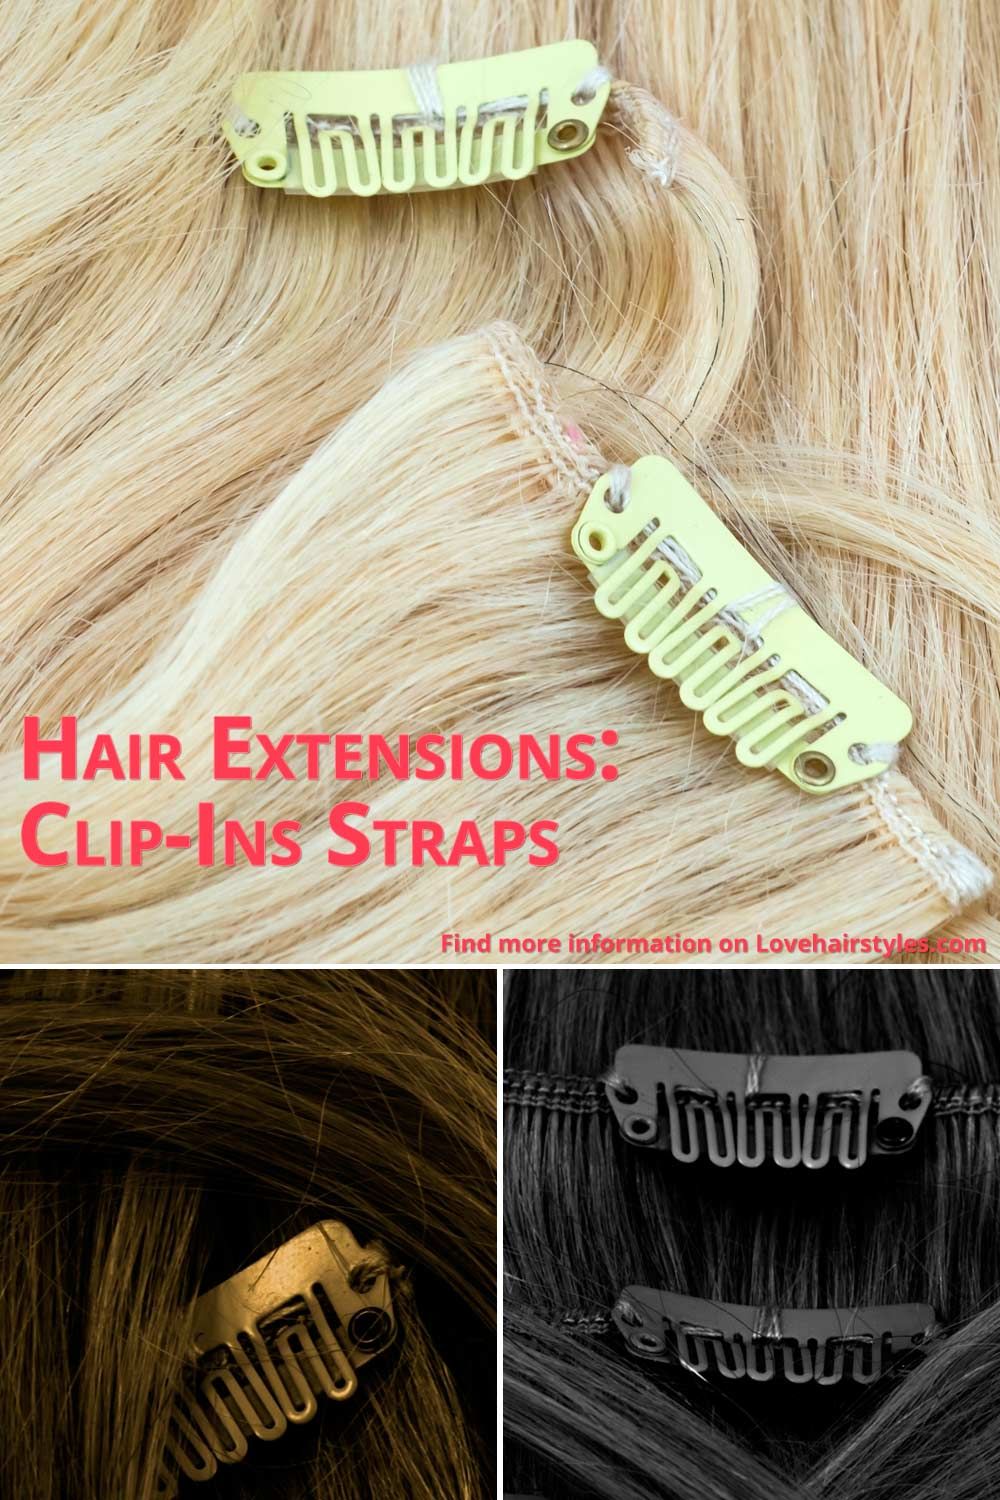 Clip-Ins Type Of Hair Extensions